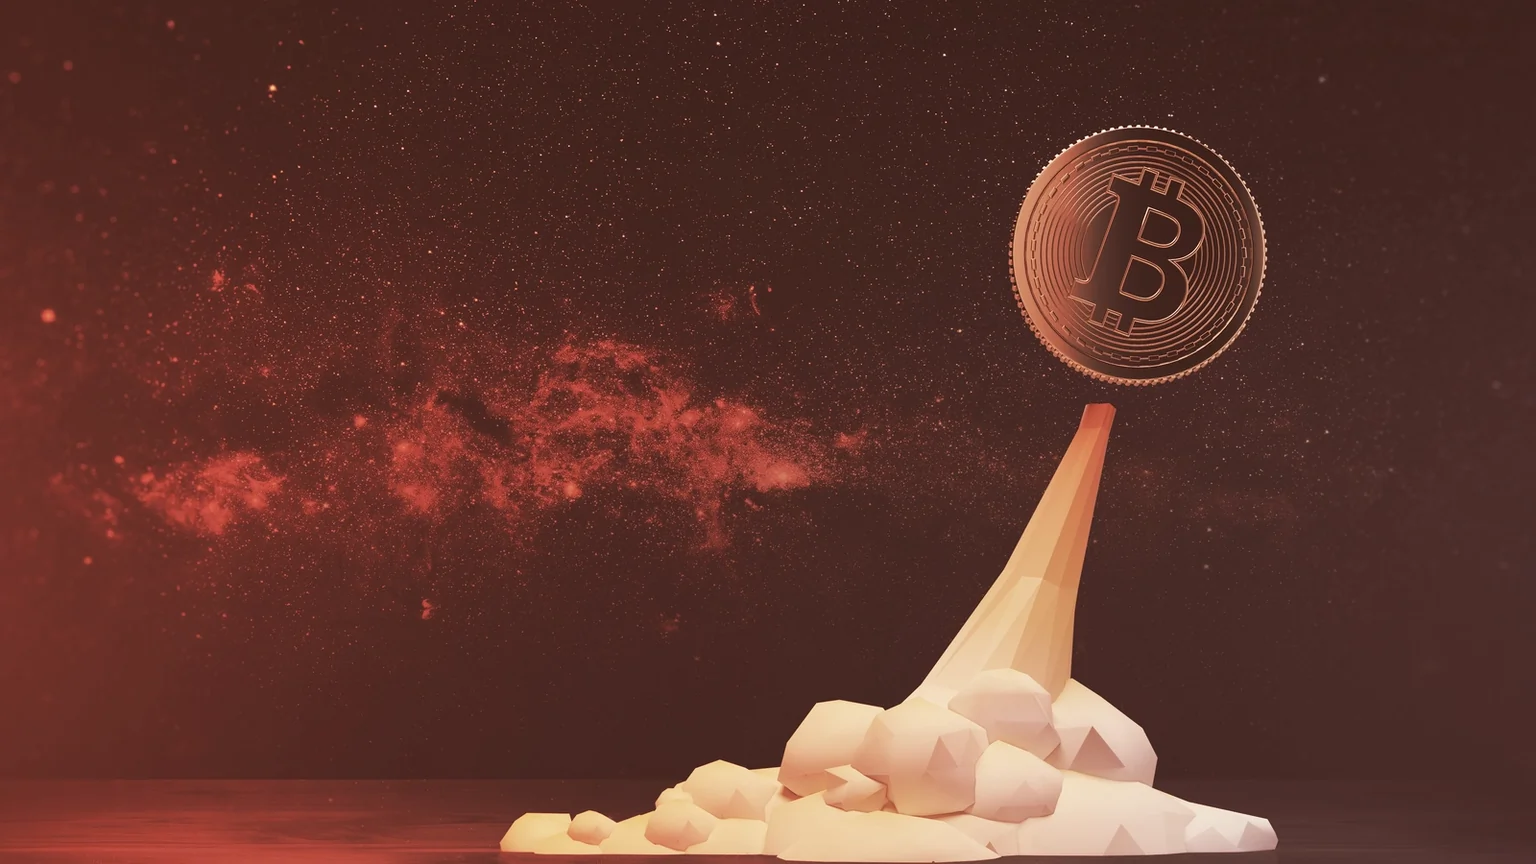 Glowing bitcoin flying like a rocket against a red open space background. Image: Shutterstock